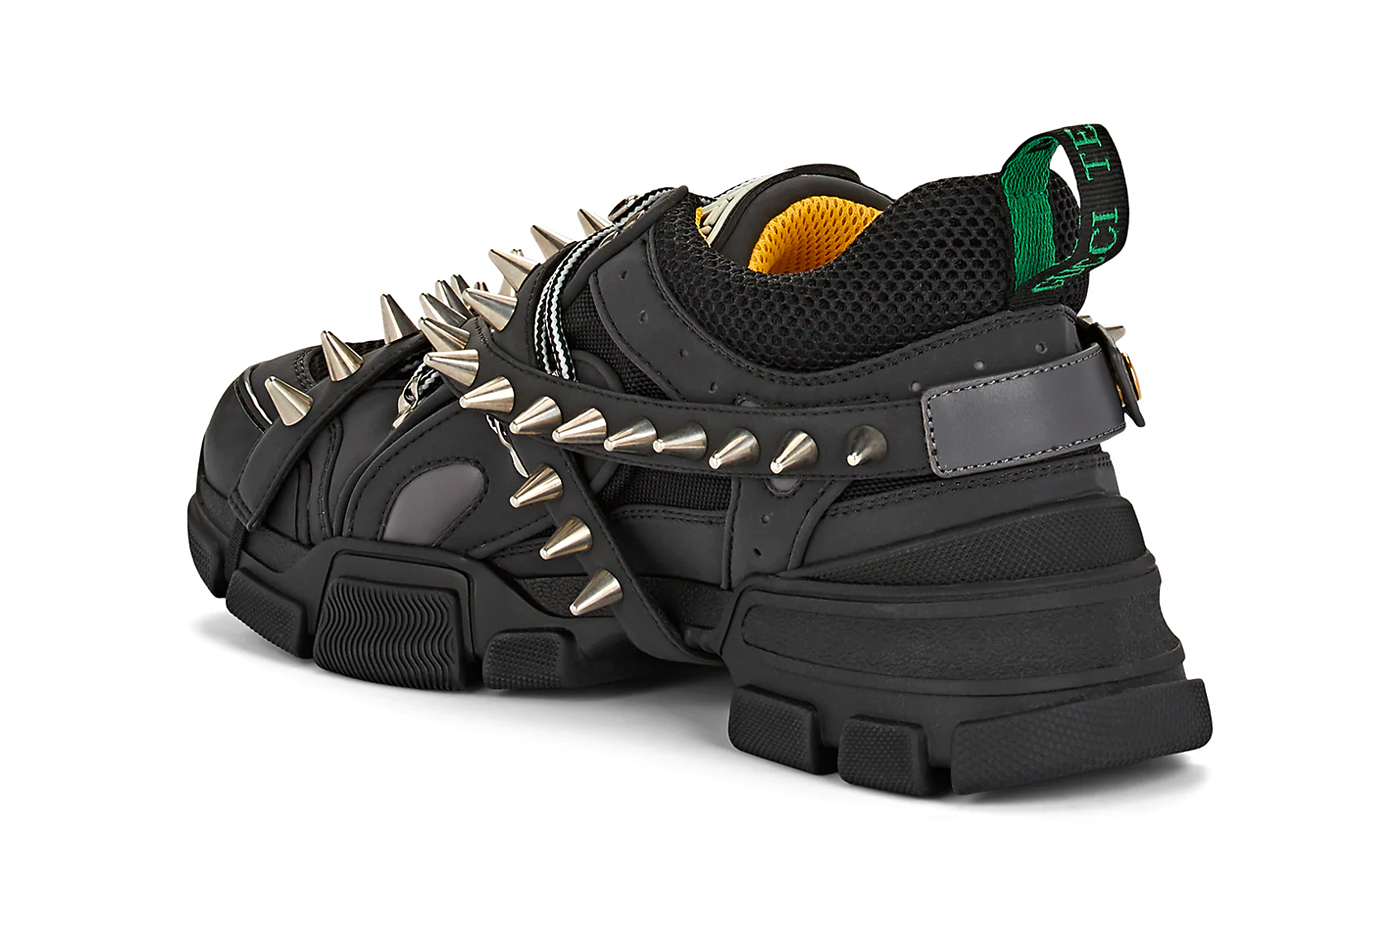 Spiked Canvas Sneakers "Black" | Drops | Hypebeast